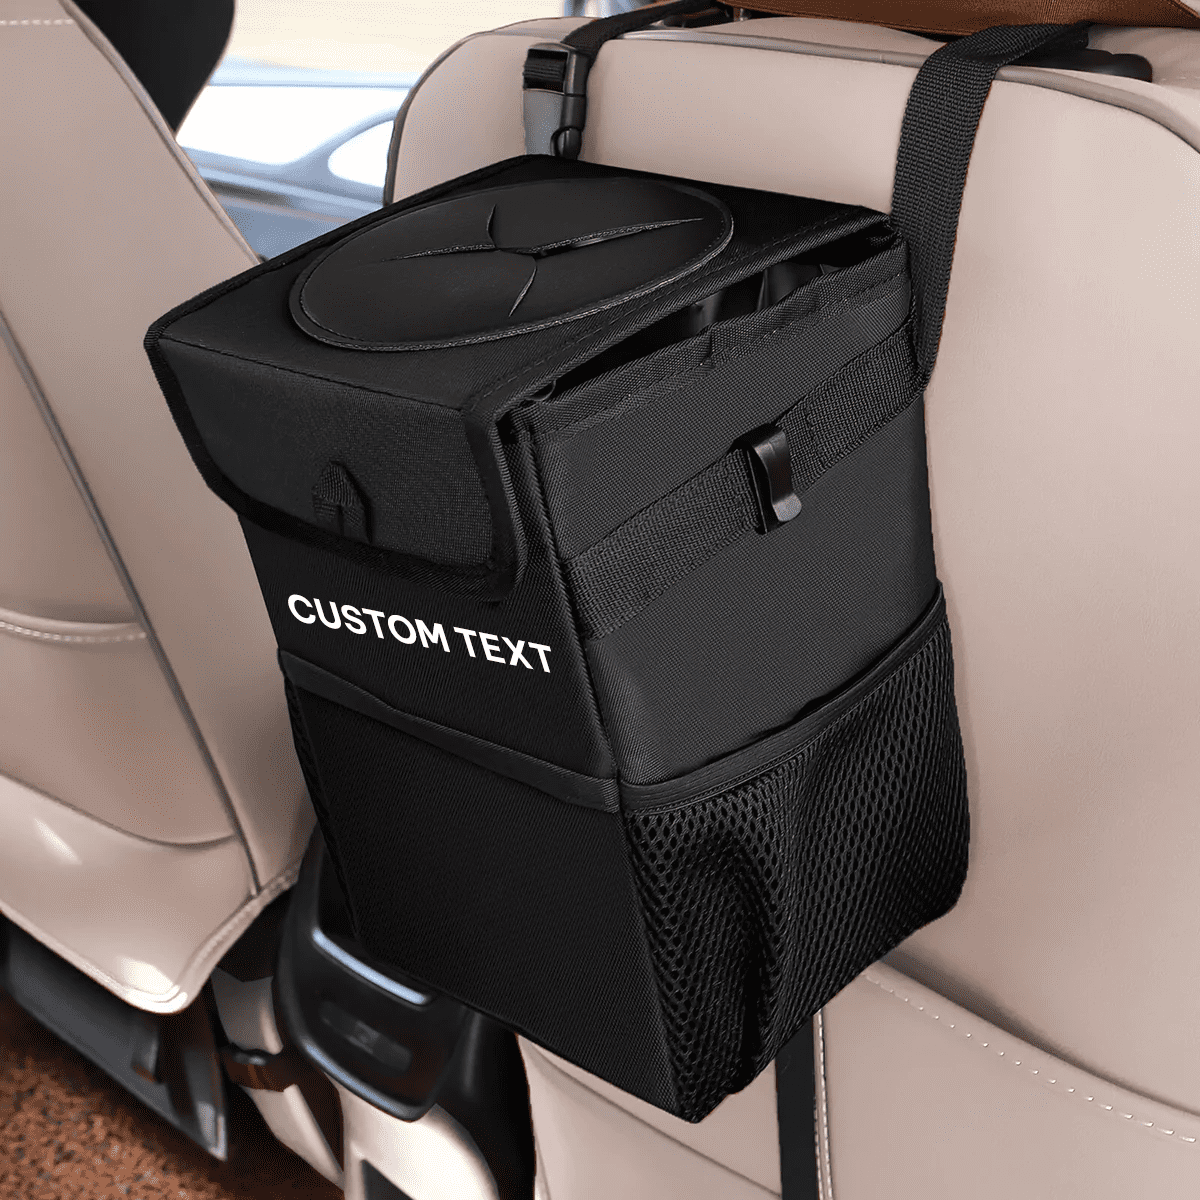 Custom Text and Logo Waterproof Car Trash Can with Lid and Storage Pockets, Fit with all car, 100% Leak-Proof Car Organizer, Waterproof Car Garbage Can, Multipurpose Trash Bin for Car - Delicate Leather